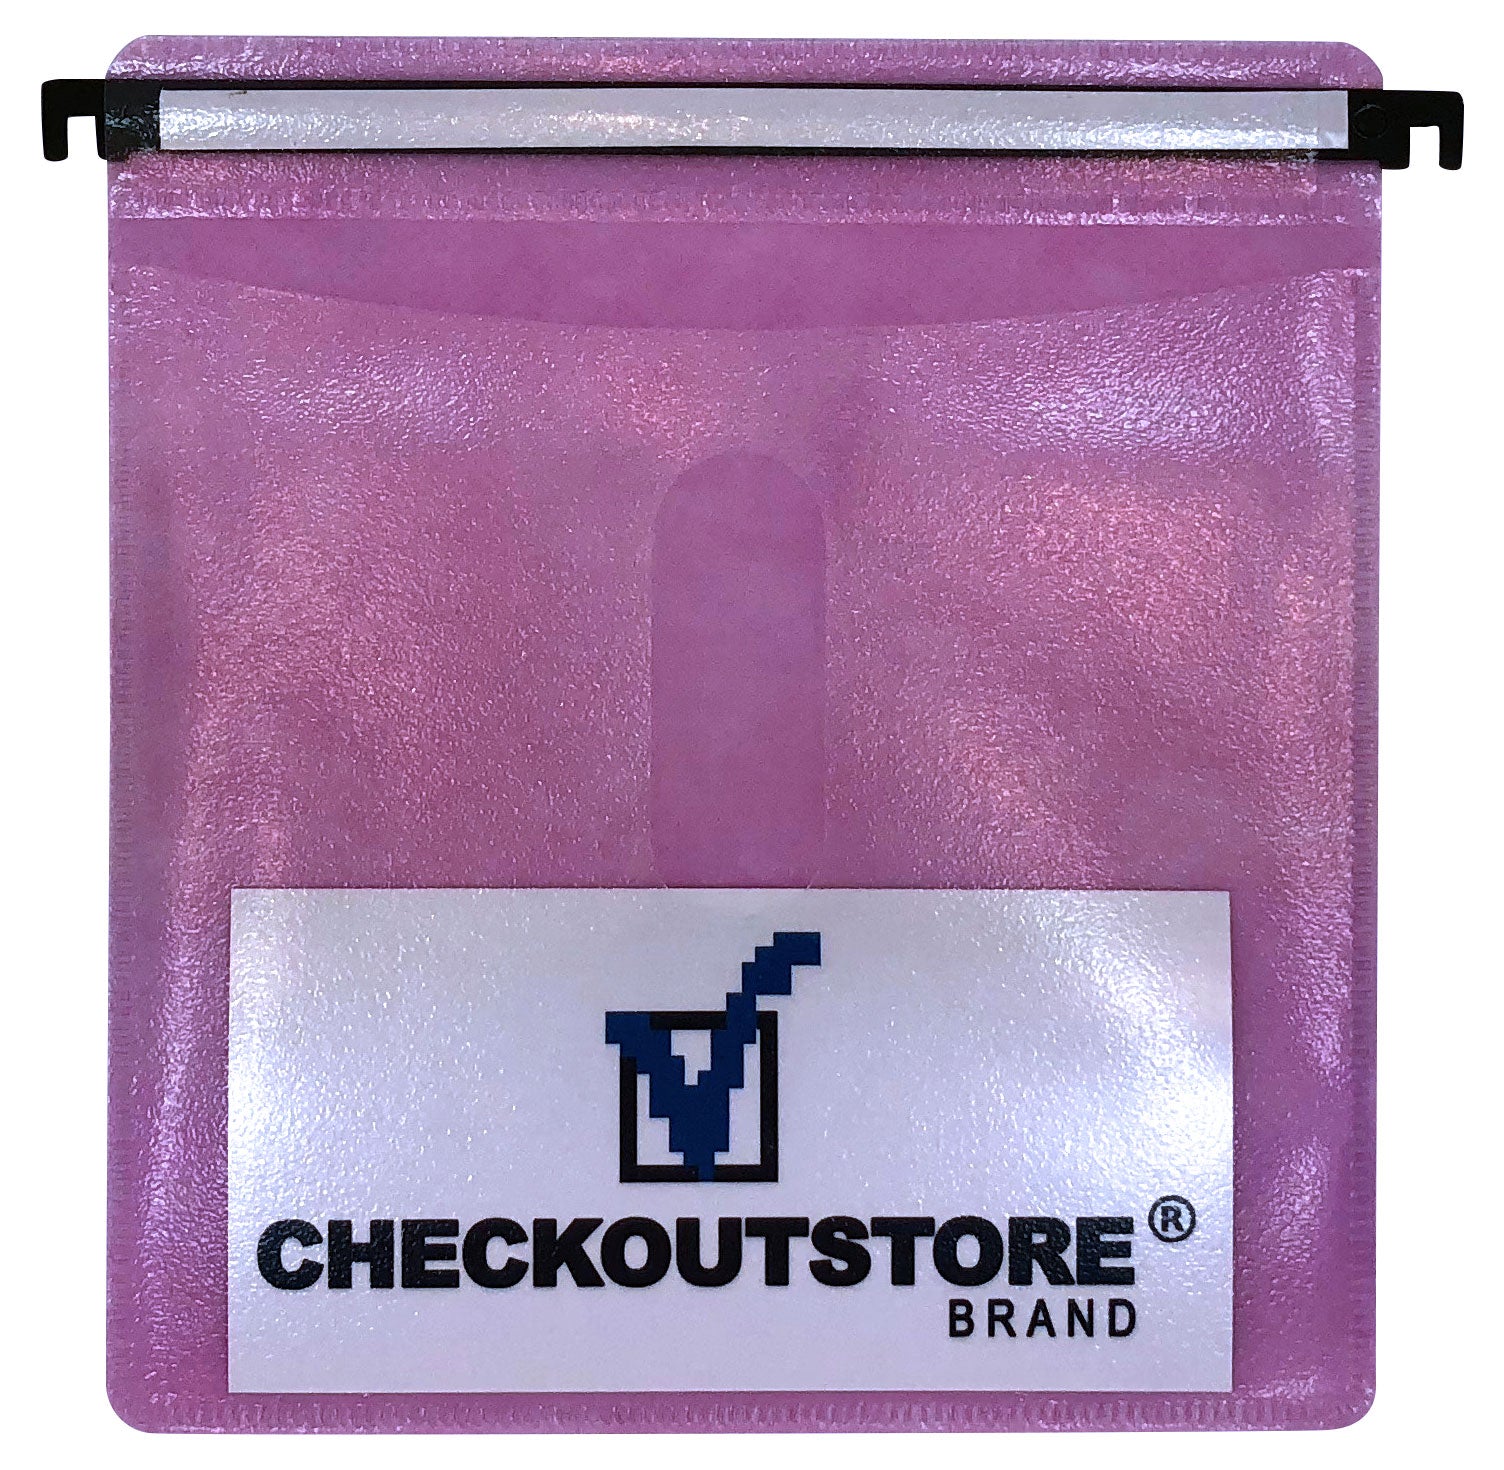 100 CheckOutStore® CD Double-sided Refill Plastic Hanging Sleeve - Pink